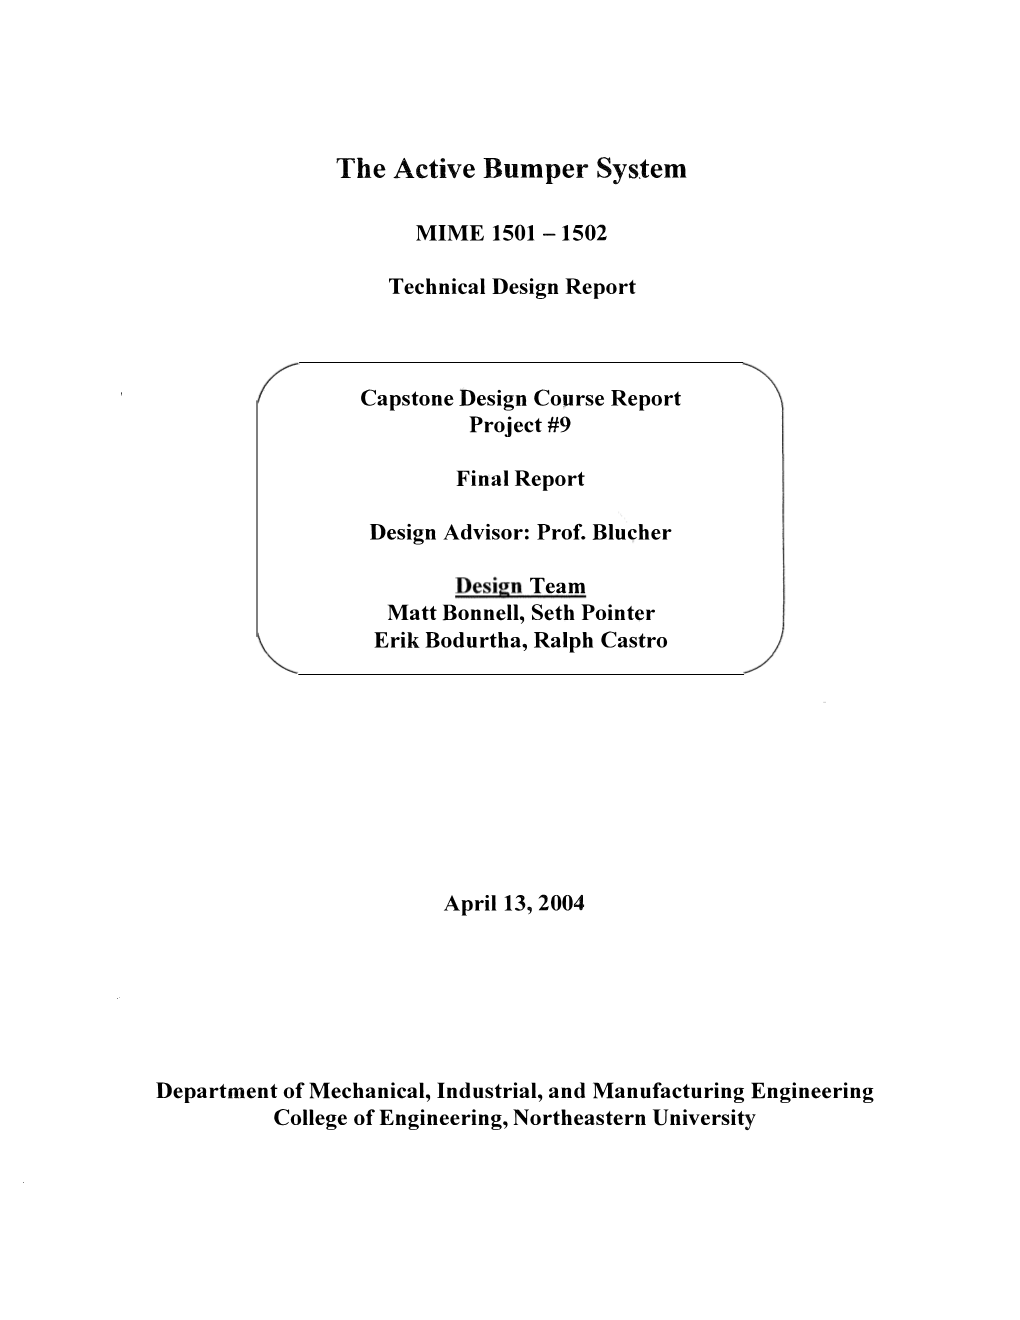 The Active Bumper Systems